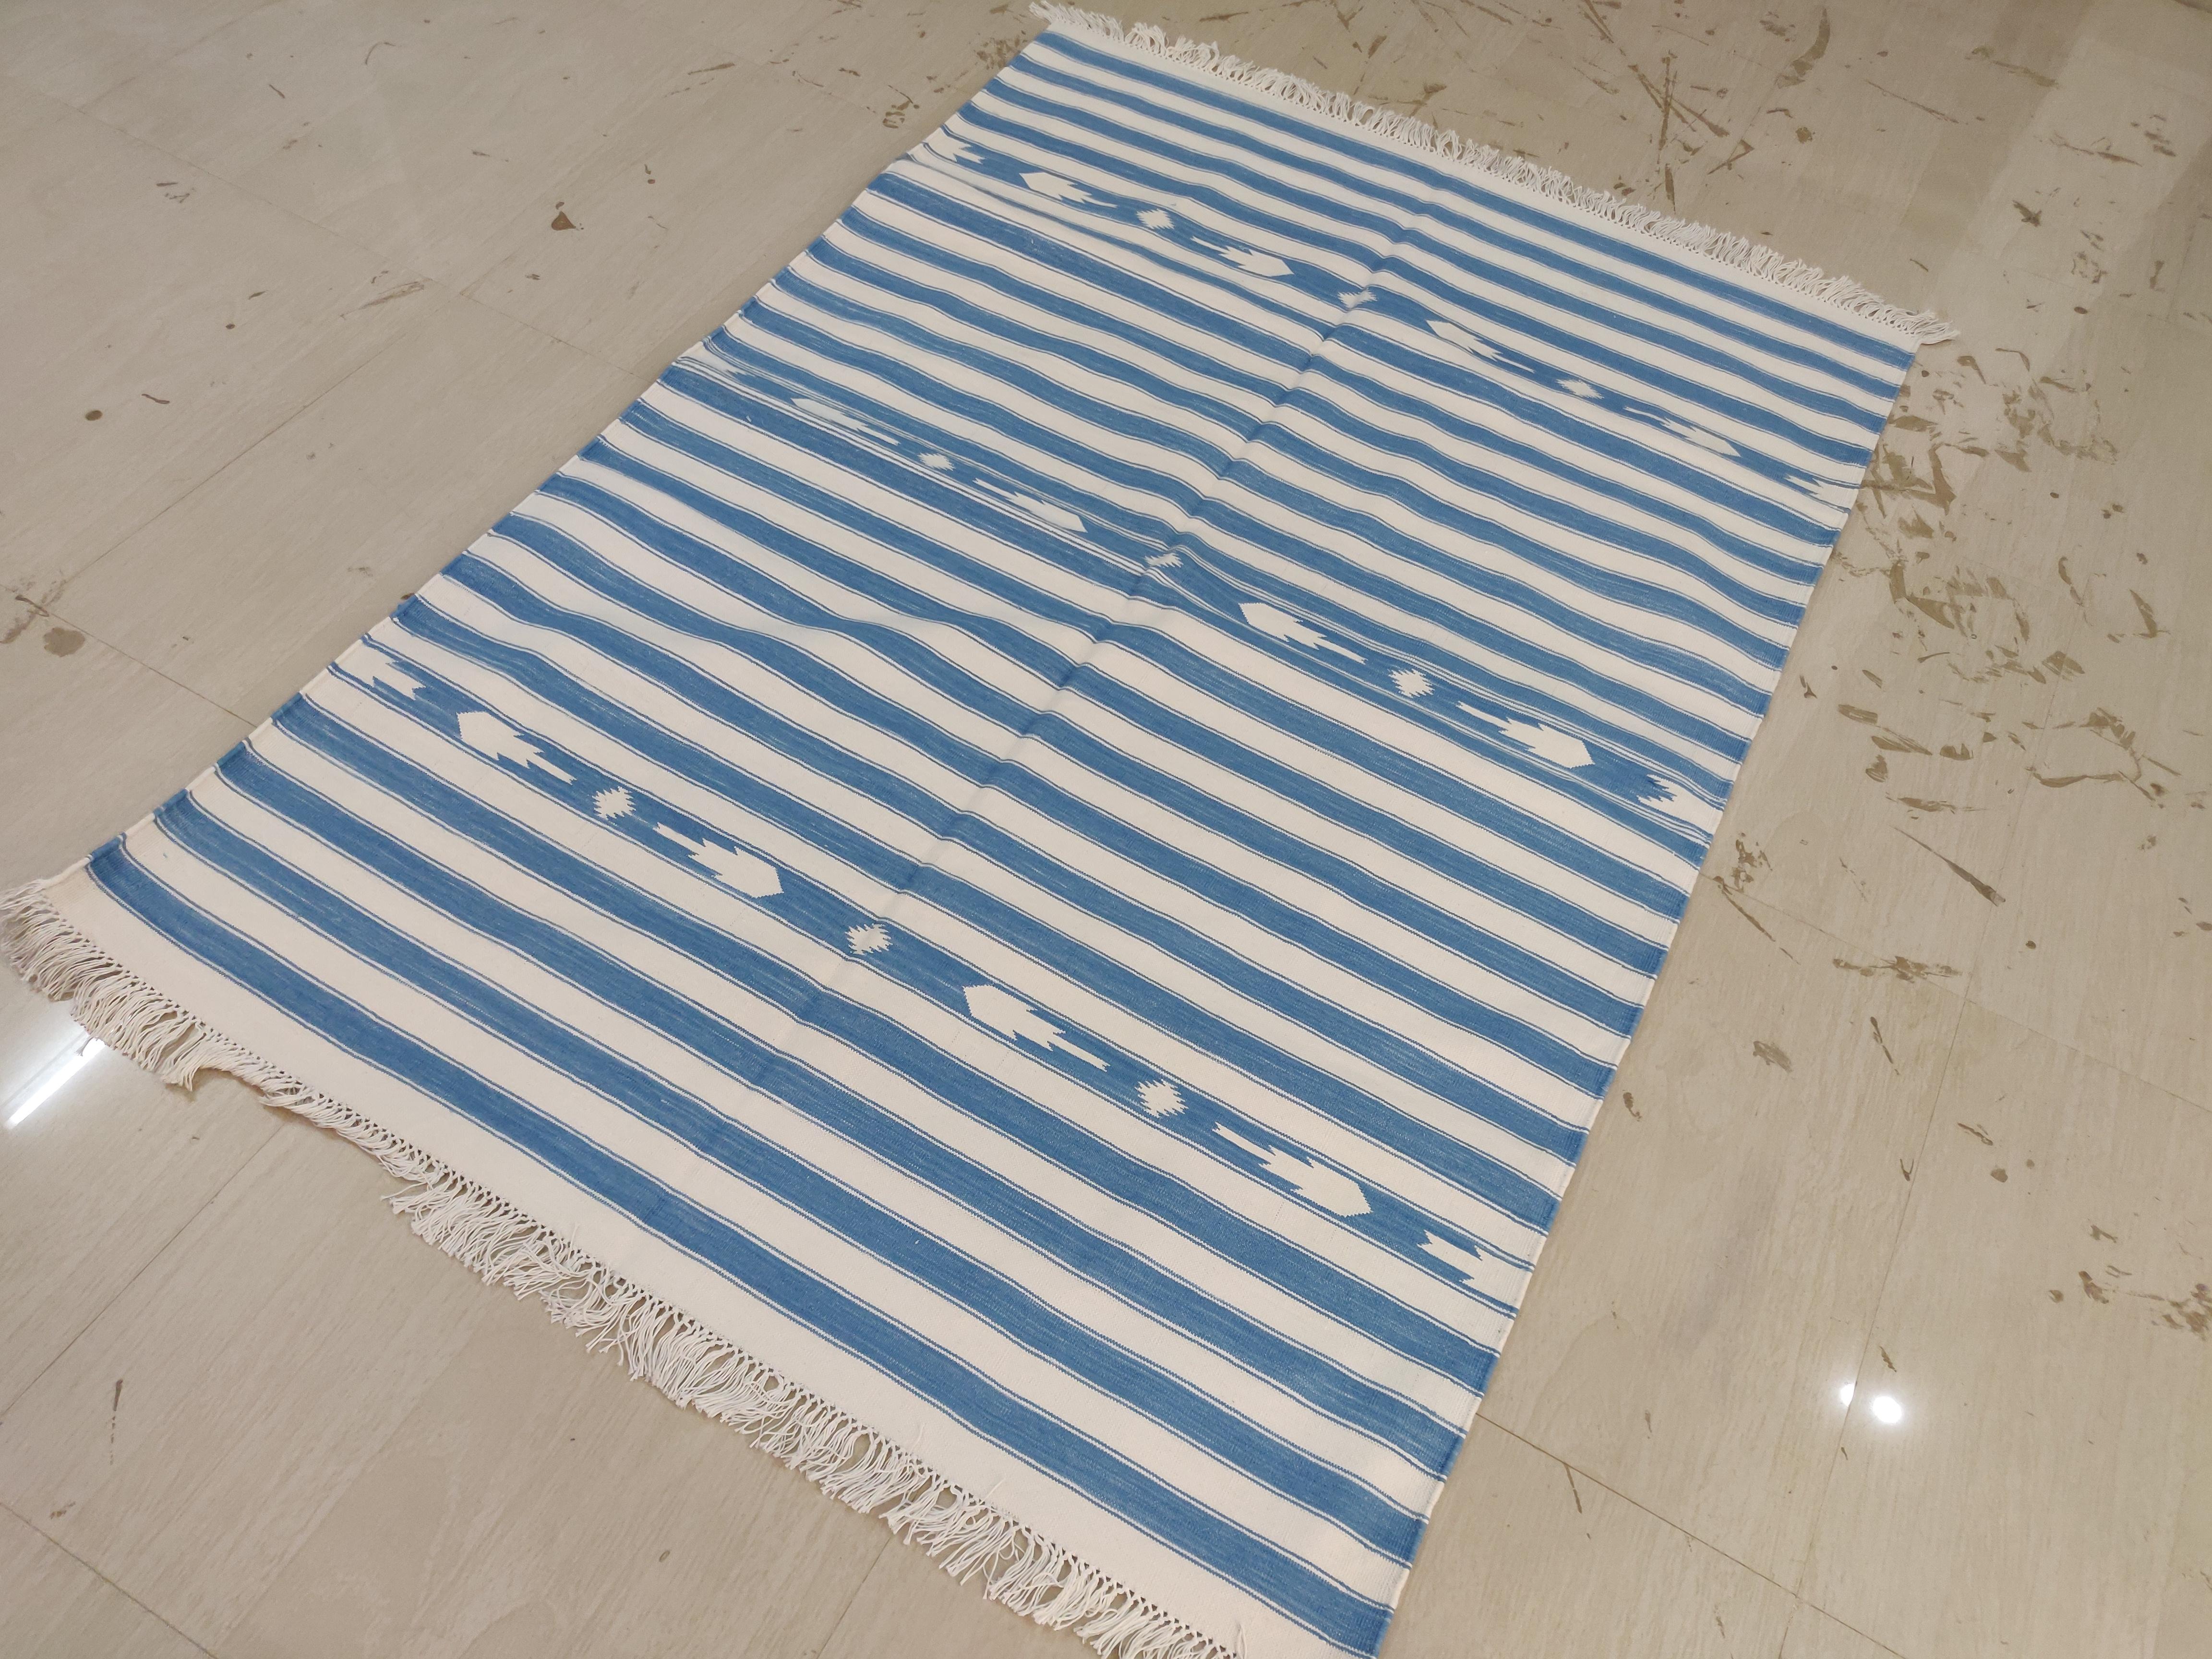 Cotton Vegetable Dyed Sky Blue And White Striped Indian Dhurrie Rug-36